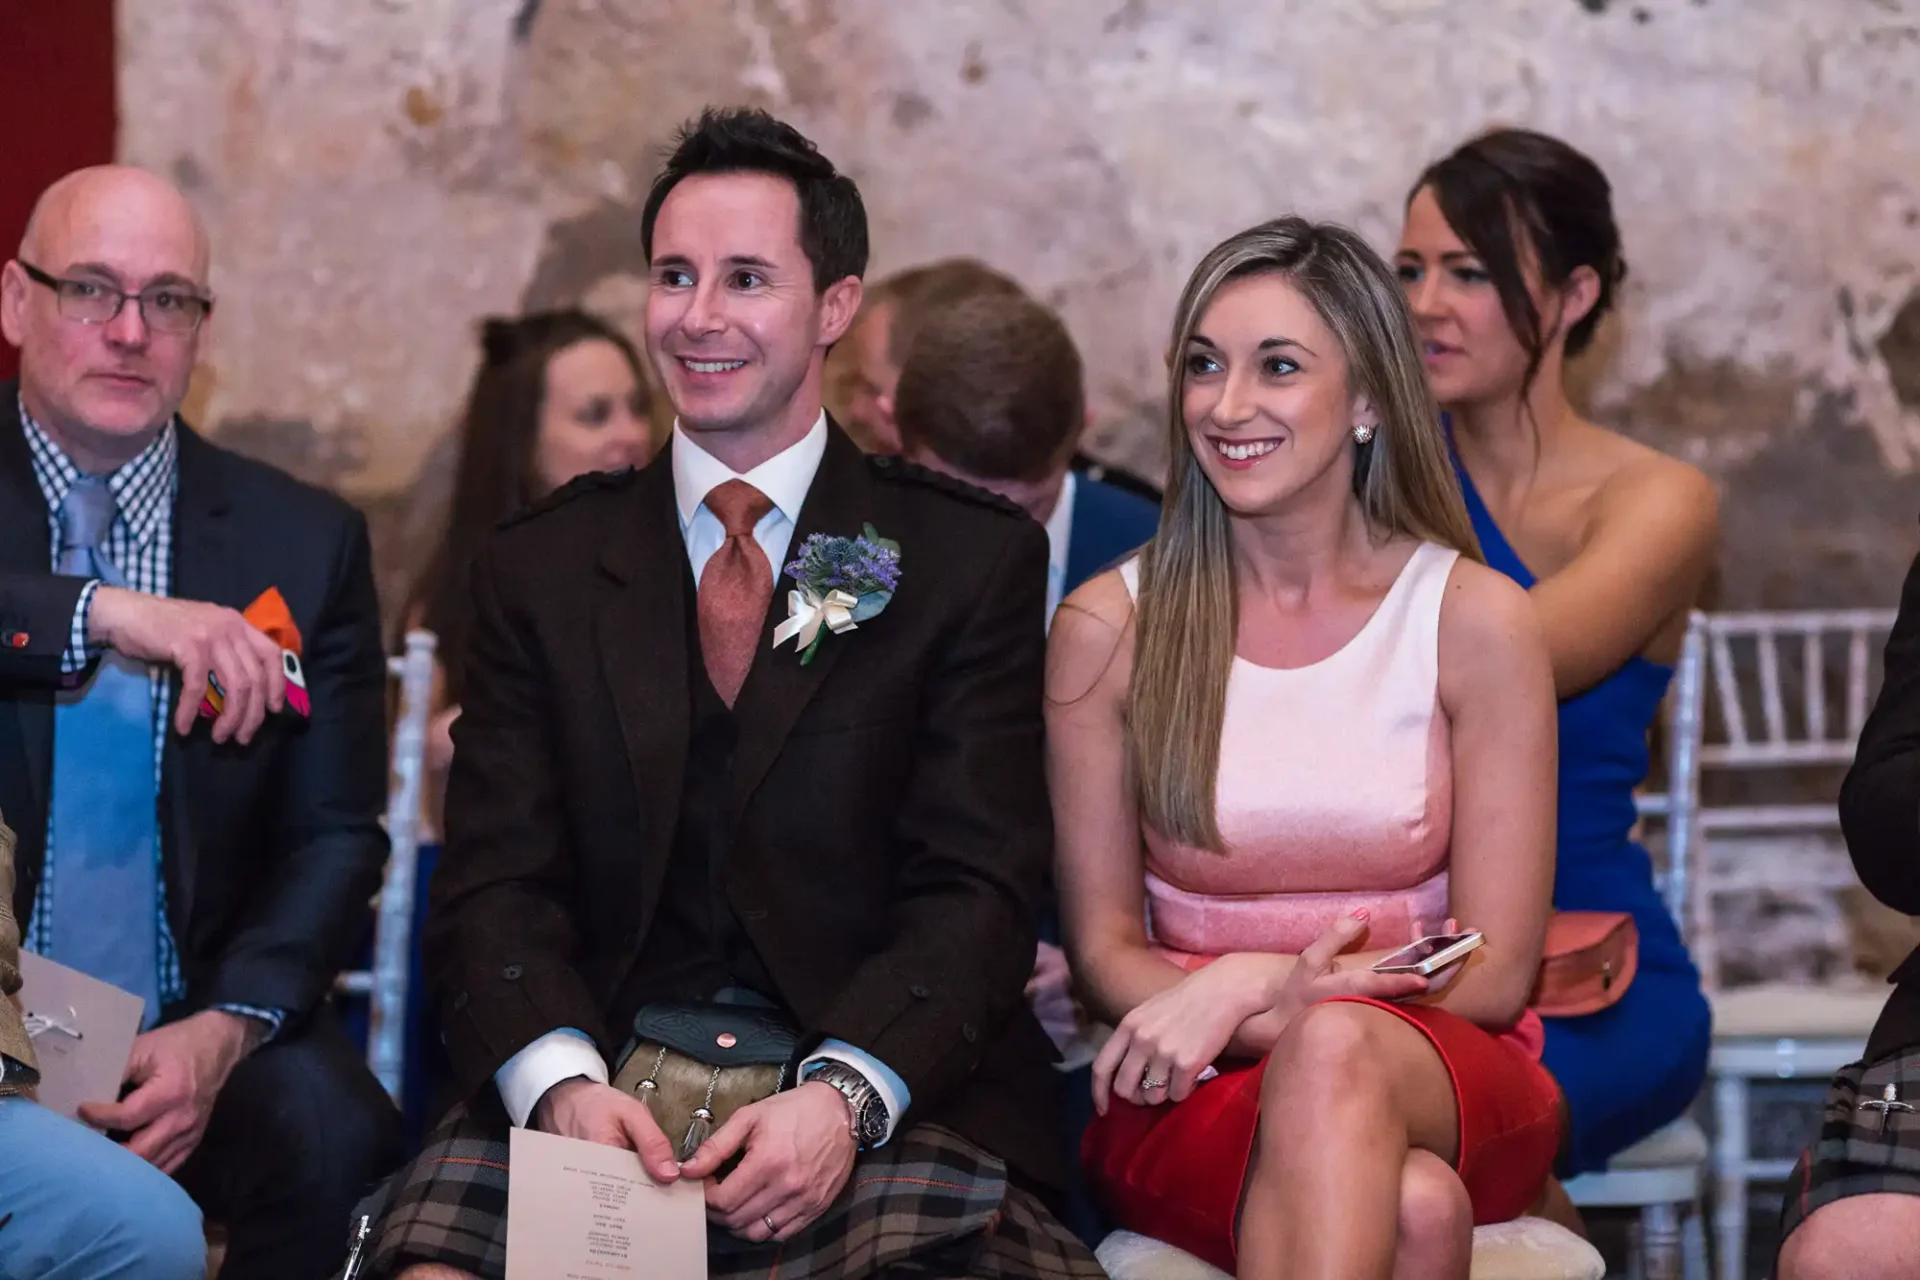 A man in a kilt and a woman in a pink dress sitting together at a wedding ceremony, both smiling and looking to the side.